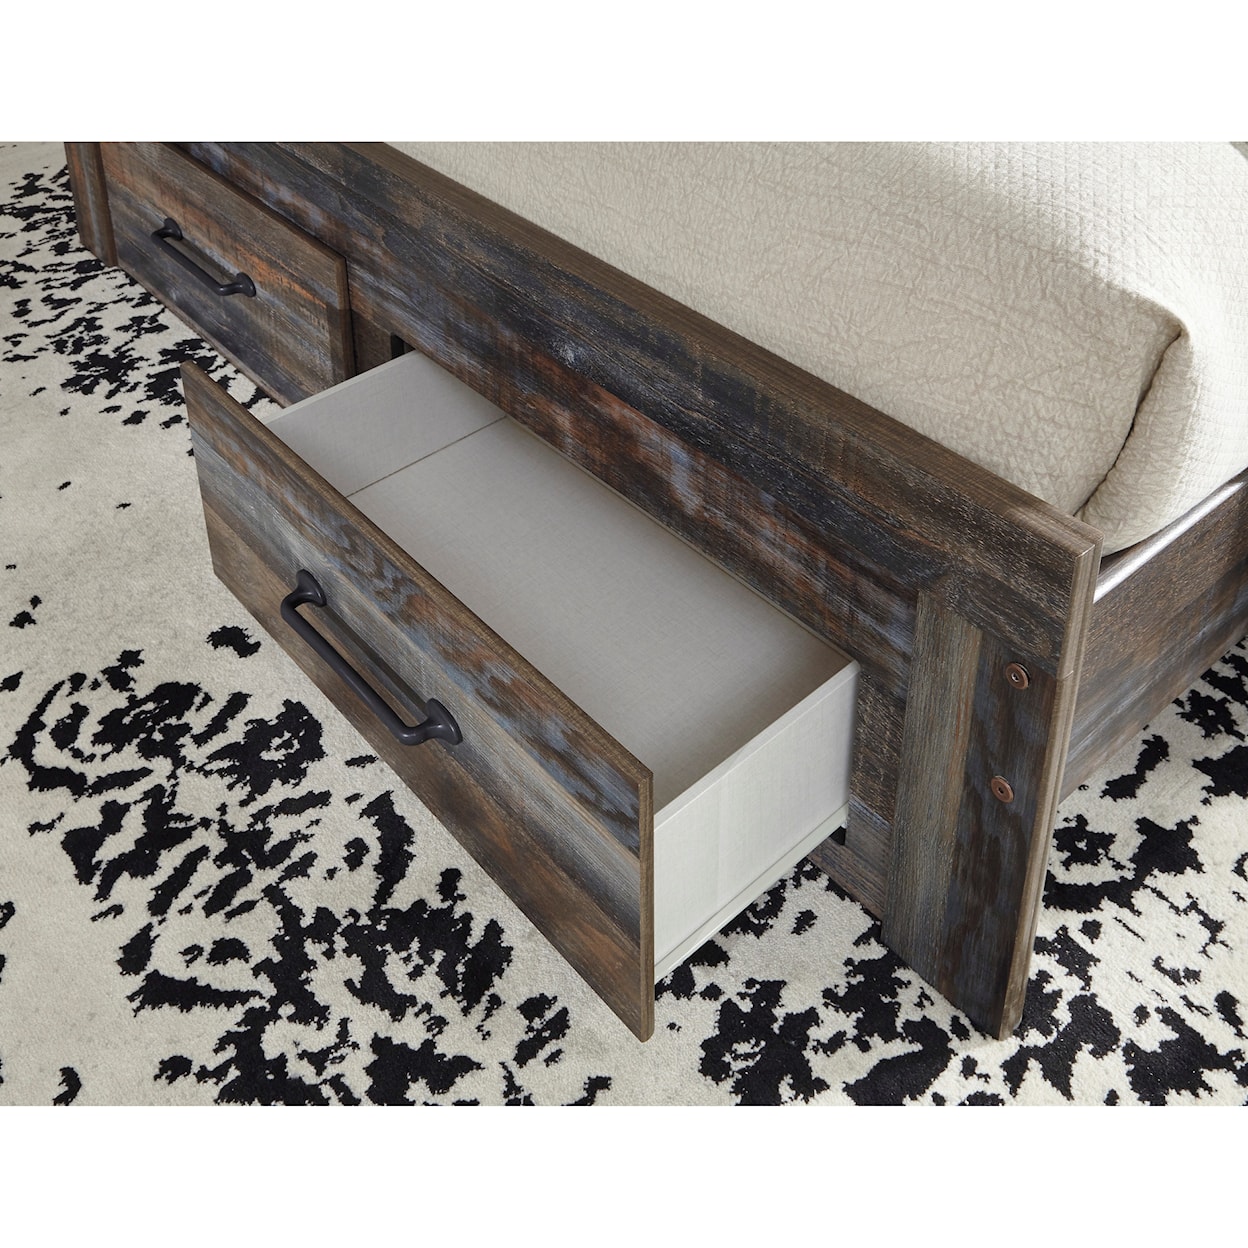 Benchcraft Drystan King Bed w/ Lights & Footboard Drawers